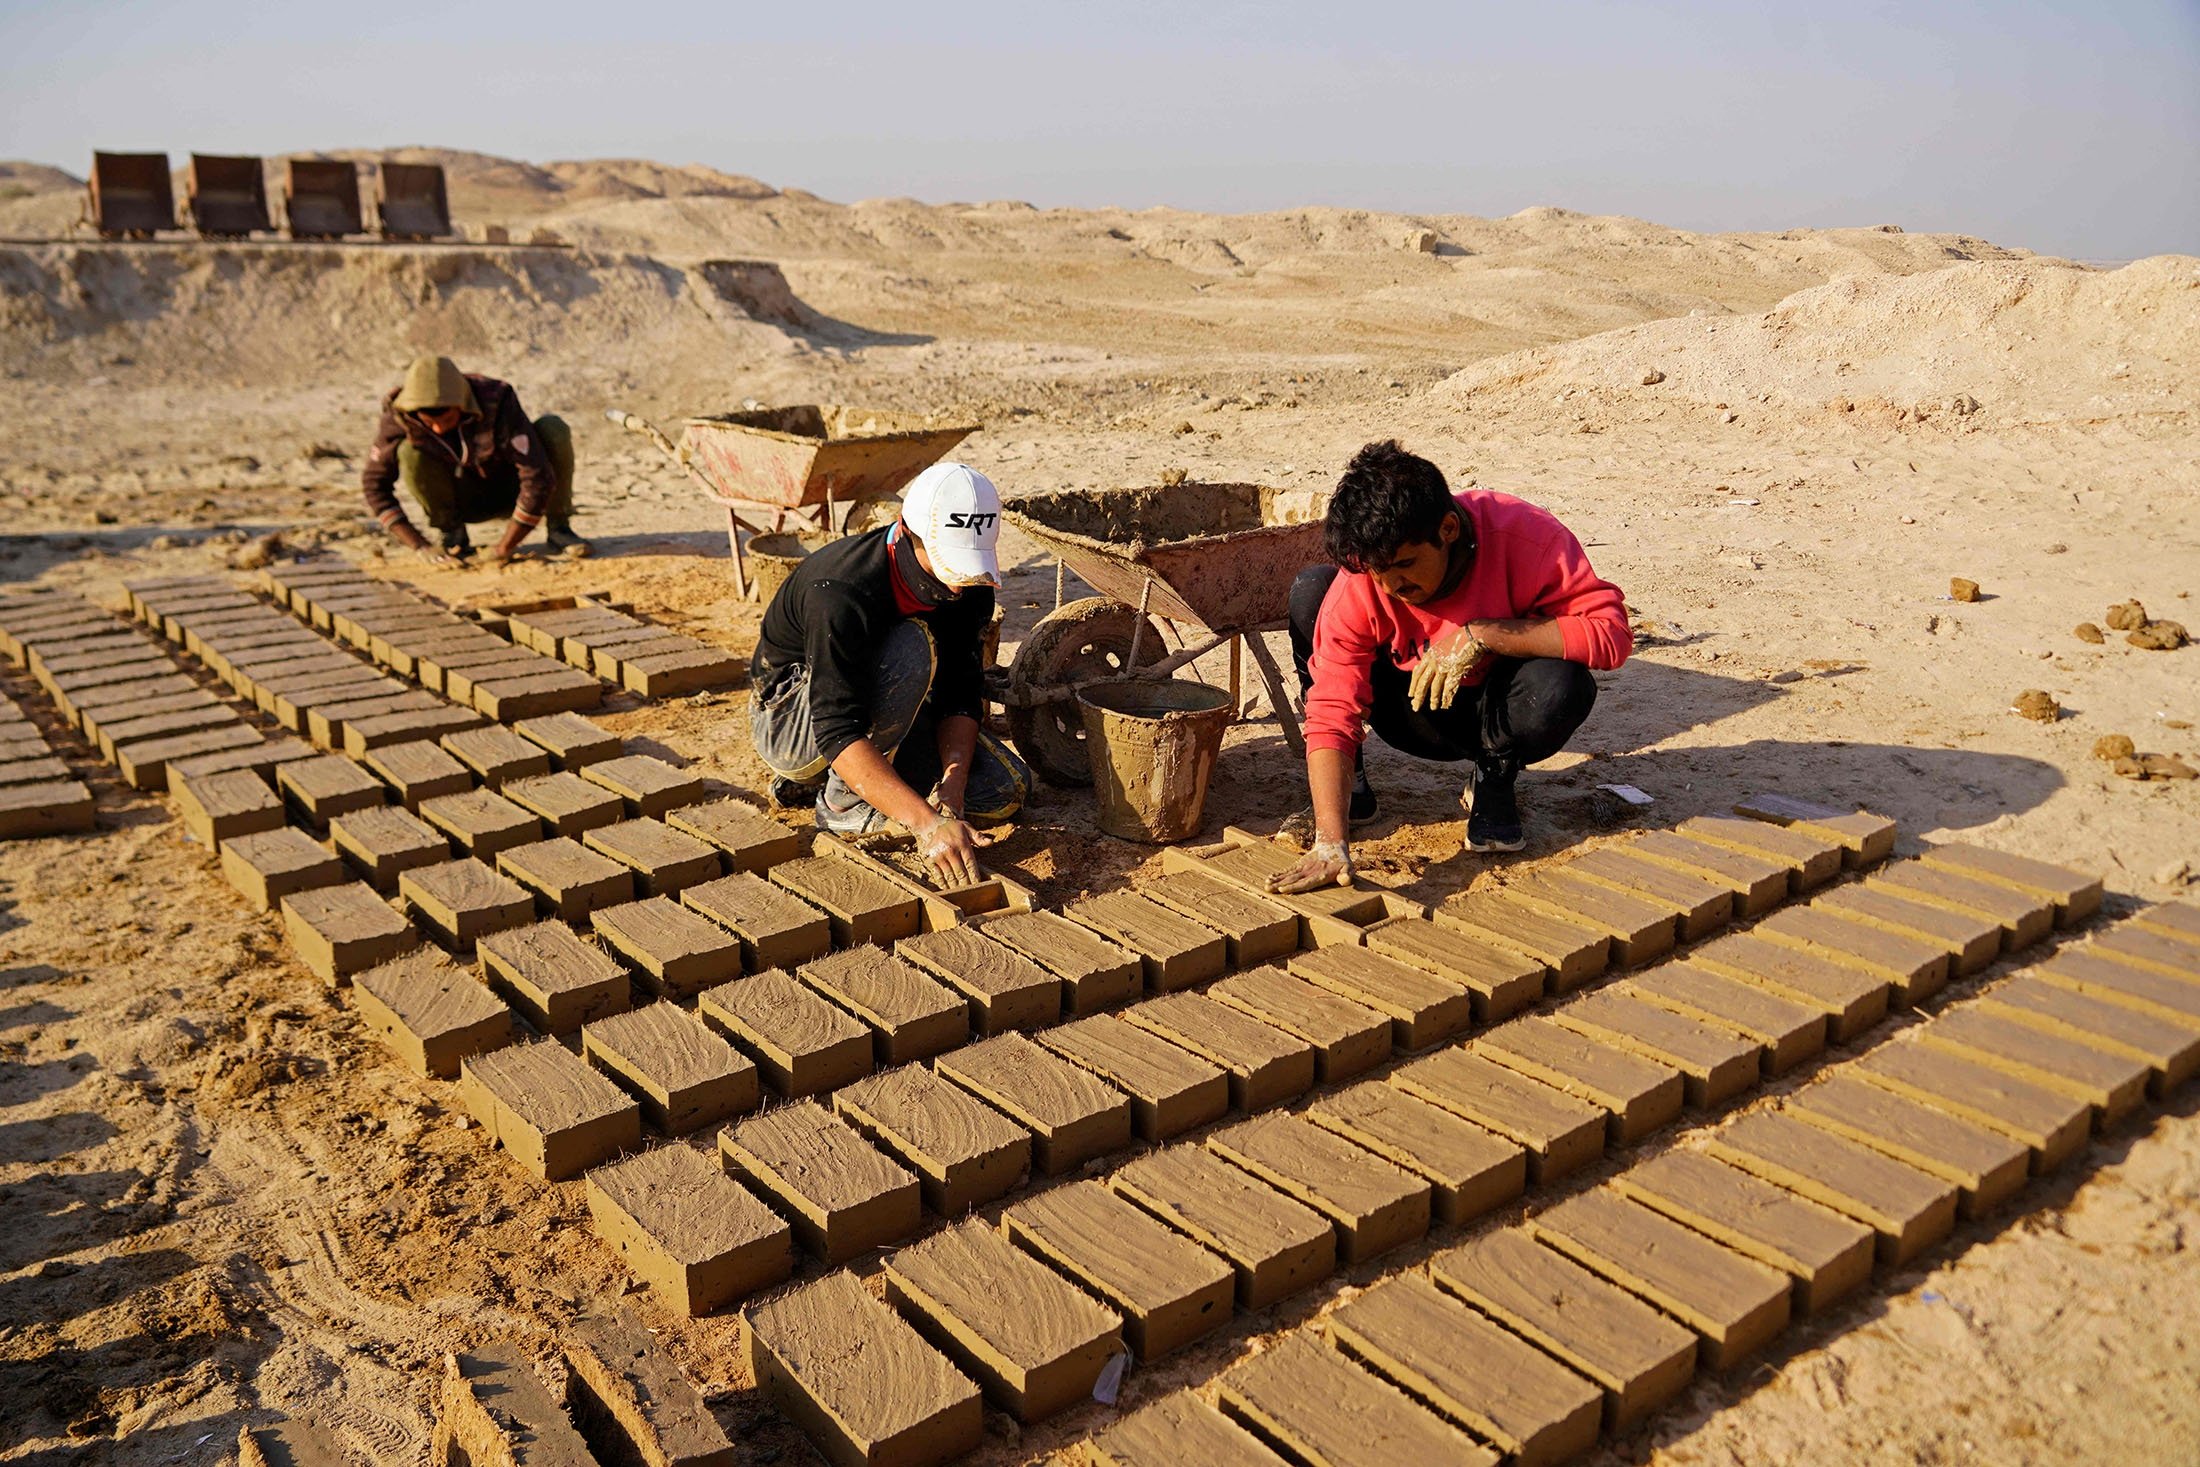 Workers make traditional clay bricks as they take part in a German-Iraqi archaeological expedition to restore the white temple of Anu in the Warka (ancient Uruk) site in Muthanna province, Iraq, Nov. 27, 2021. (AFP Photo)